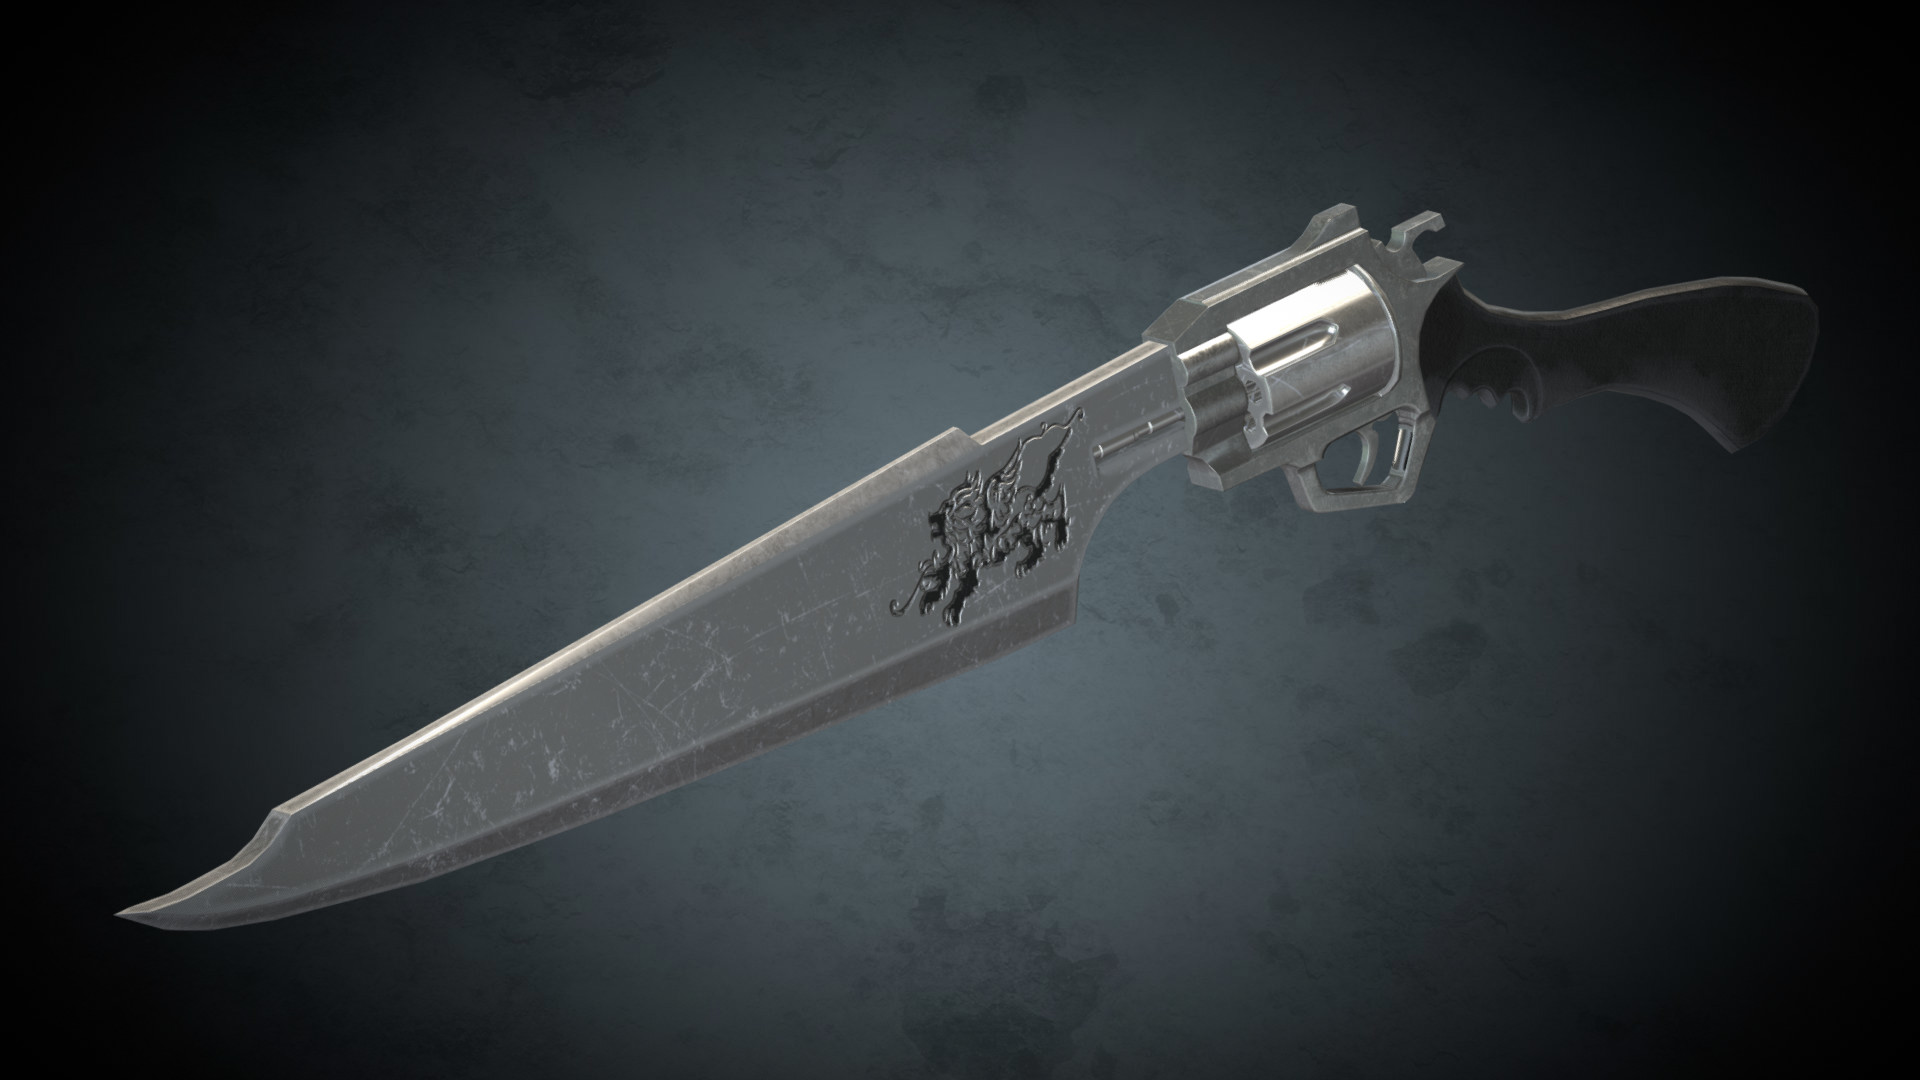 Famous Video Game Weapons - Final Fantasy VIII’s Gunblade